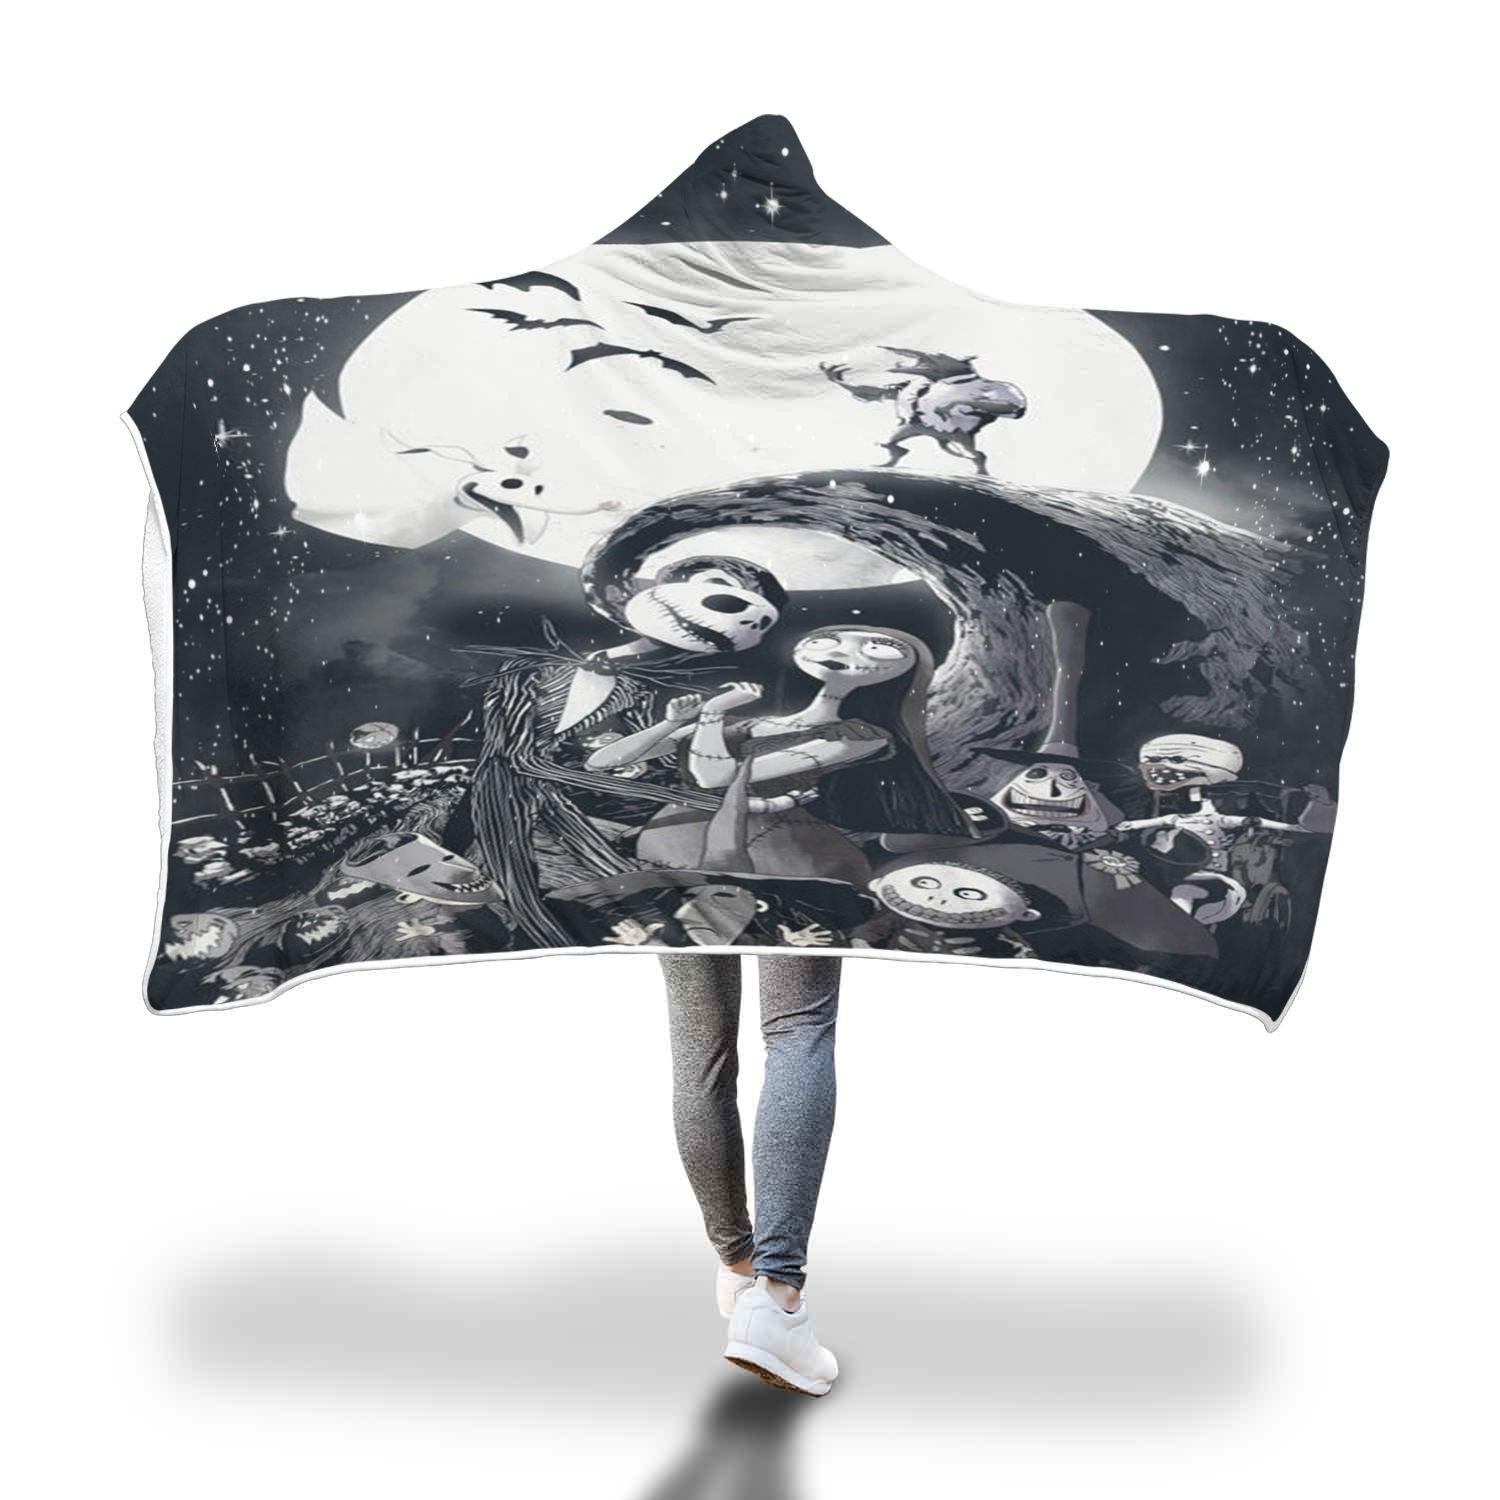 The Nightmare Before Christmas Hooded Blanket - GINHB01 8205